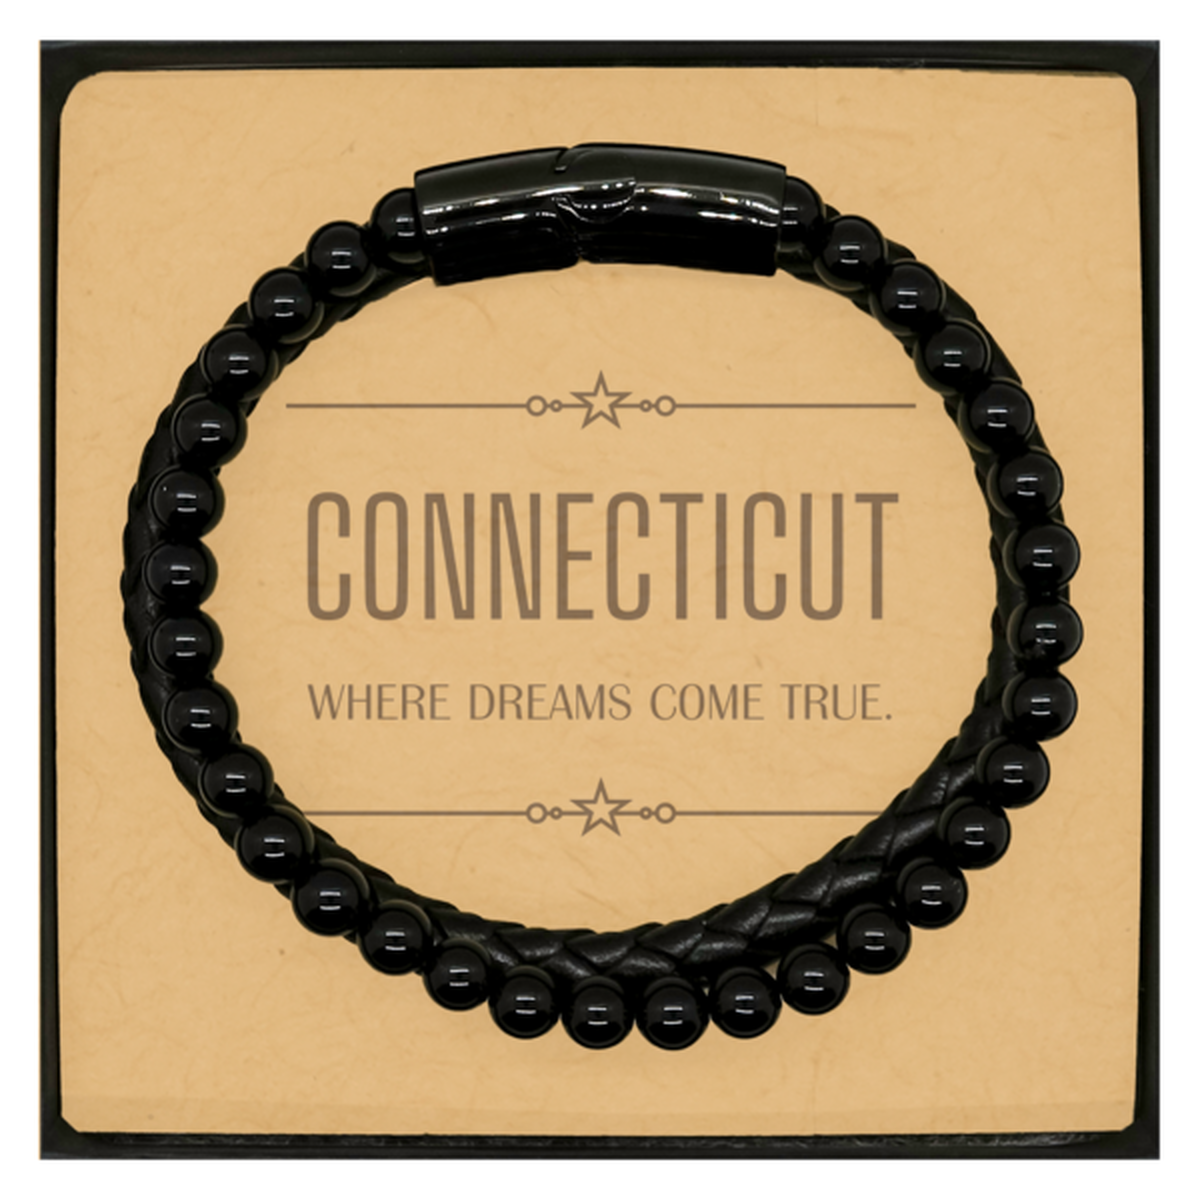 Love Connecticut State Stone Leather Bracelets, Connecticut Where dreams come true, Birthday Christmas Inspirational Gifts For Connecticut Men, Women, Friends